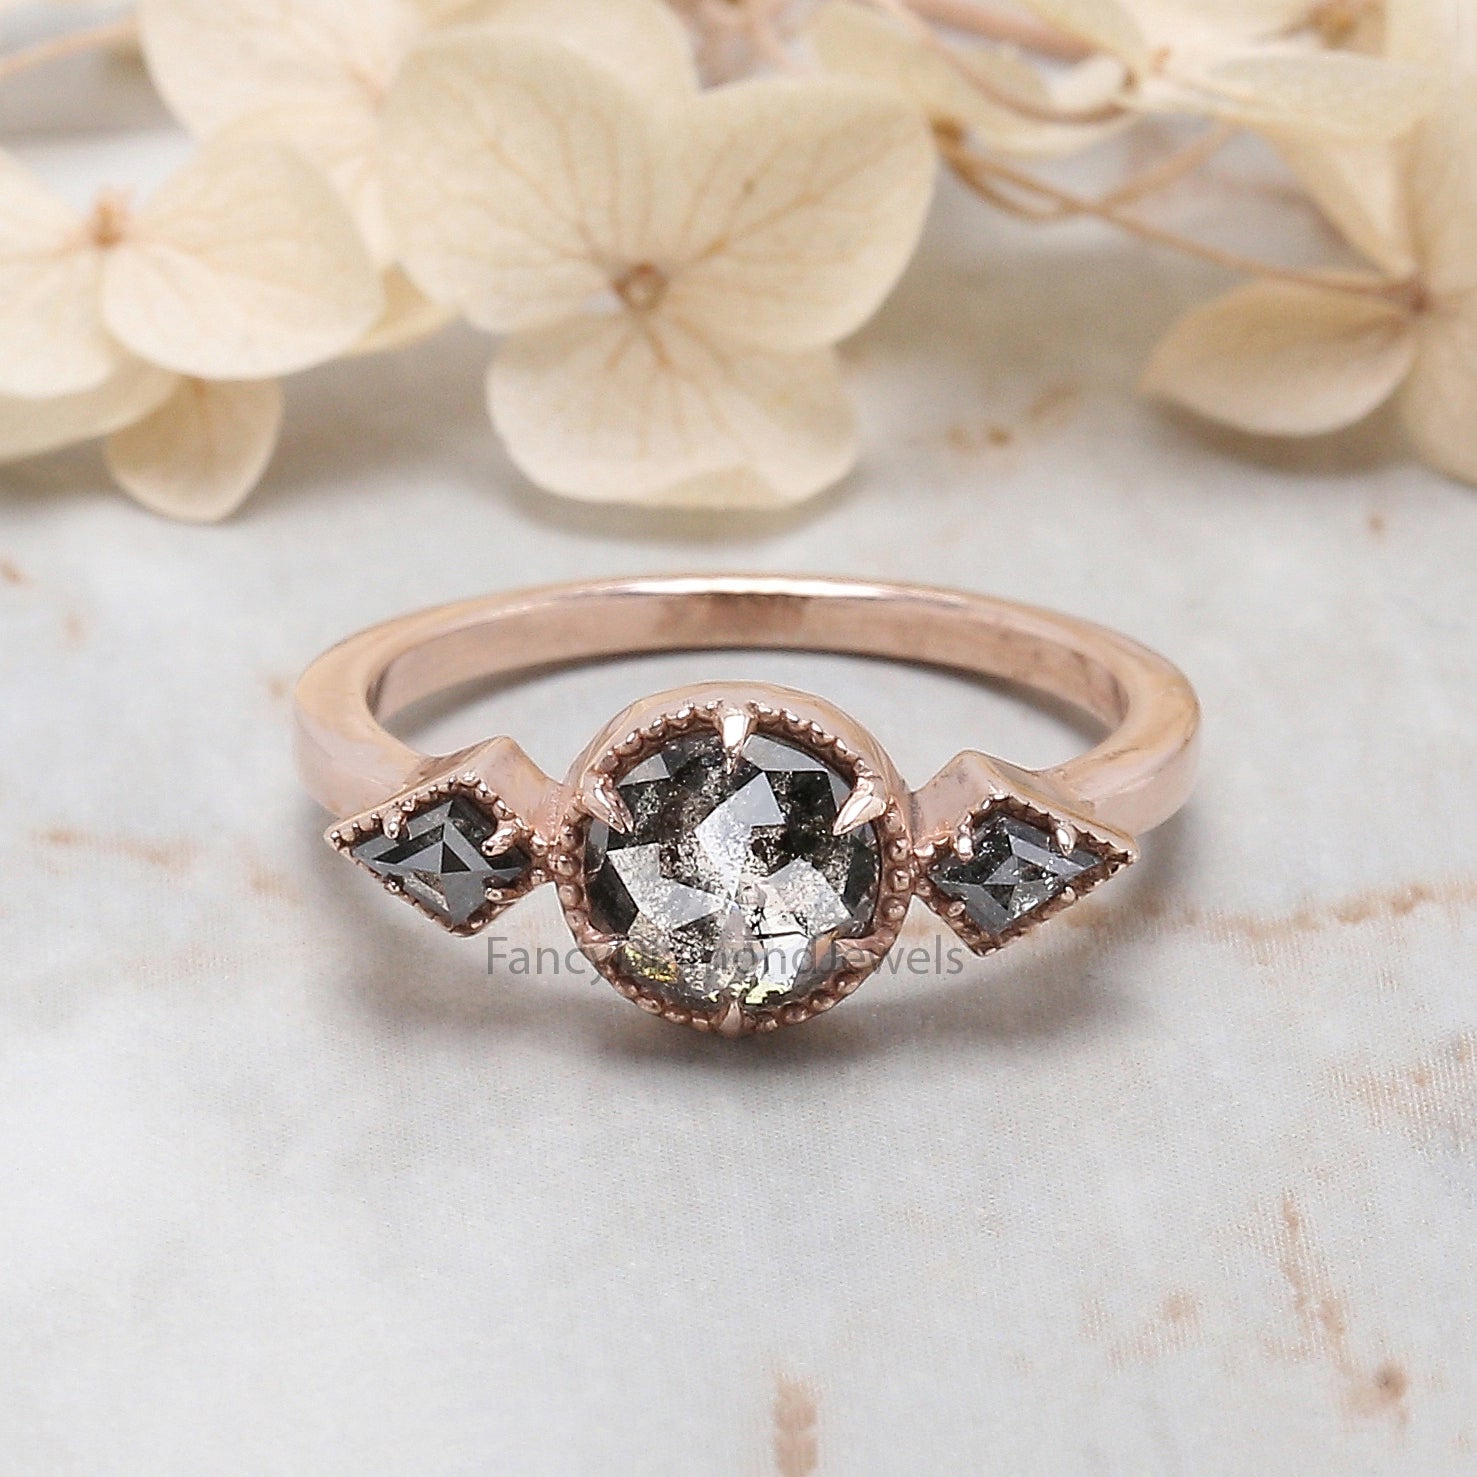 Round Rose Cut Salt And Pepper Diamond Ring 1.08 Ct 6.35 MM Round Diamond Ring 14K Rose Gold Silver Engagement Ring Gift For Her QL1402